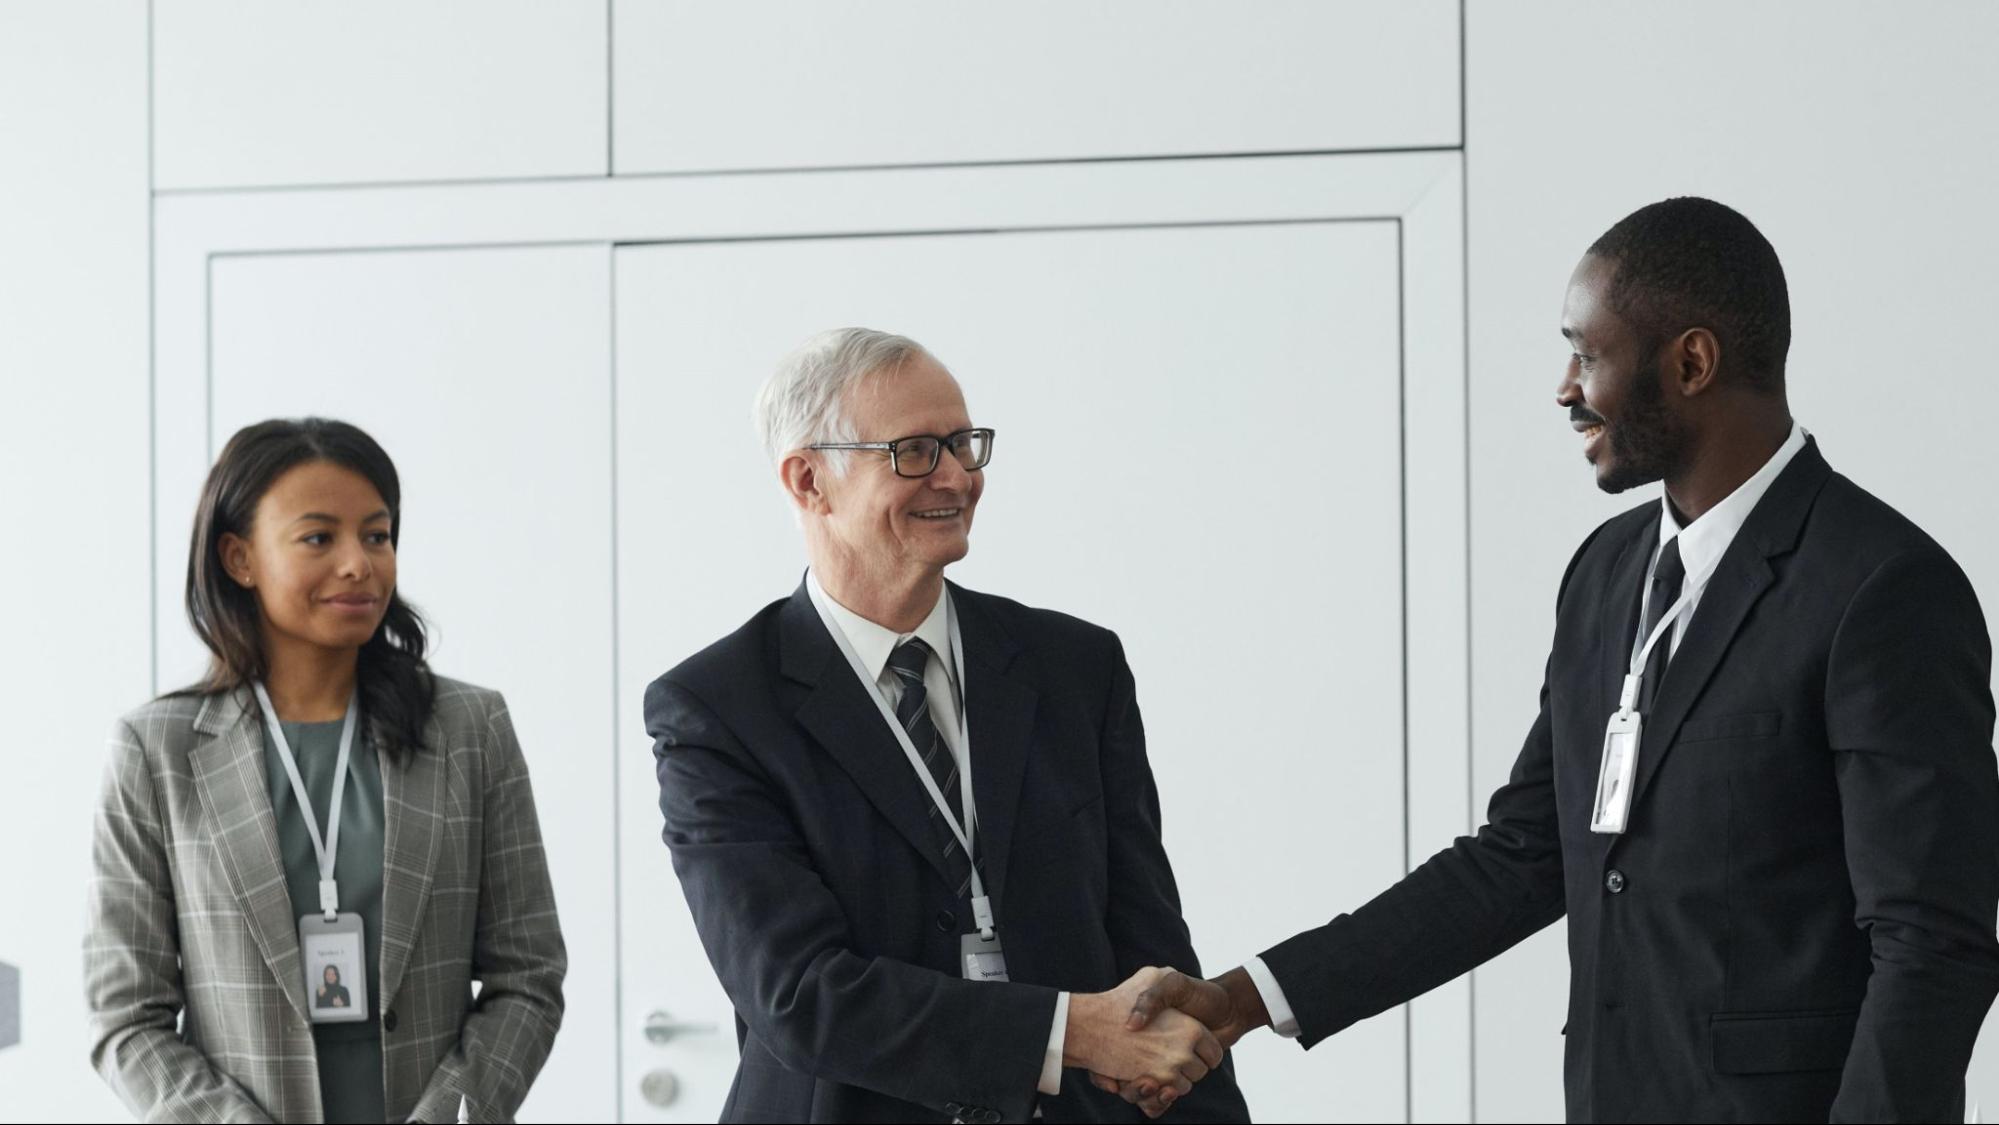 business persons meeting together and shaking hands